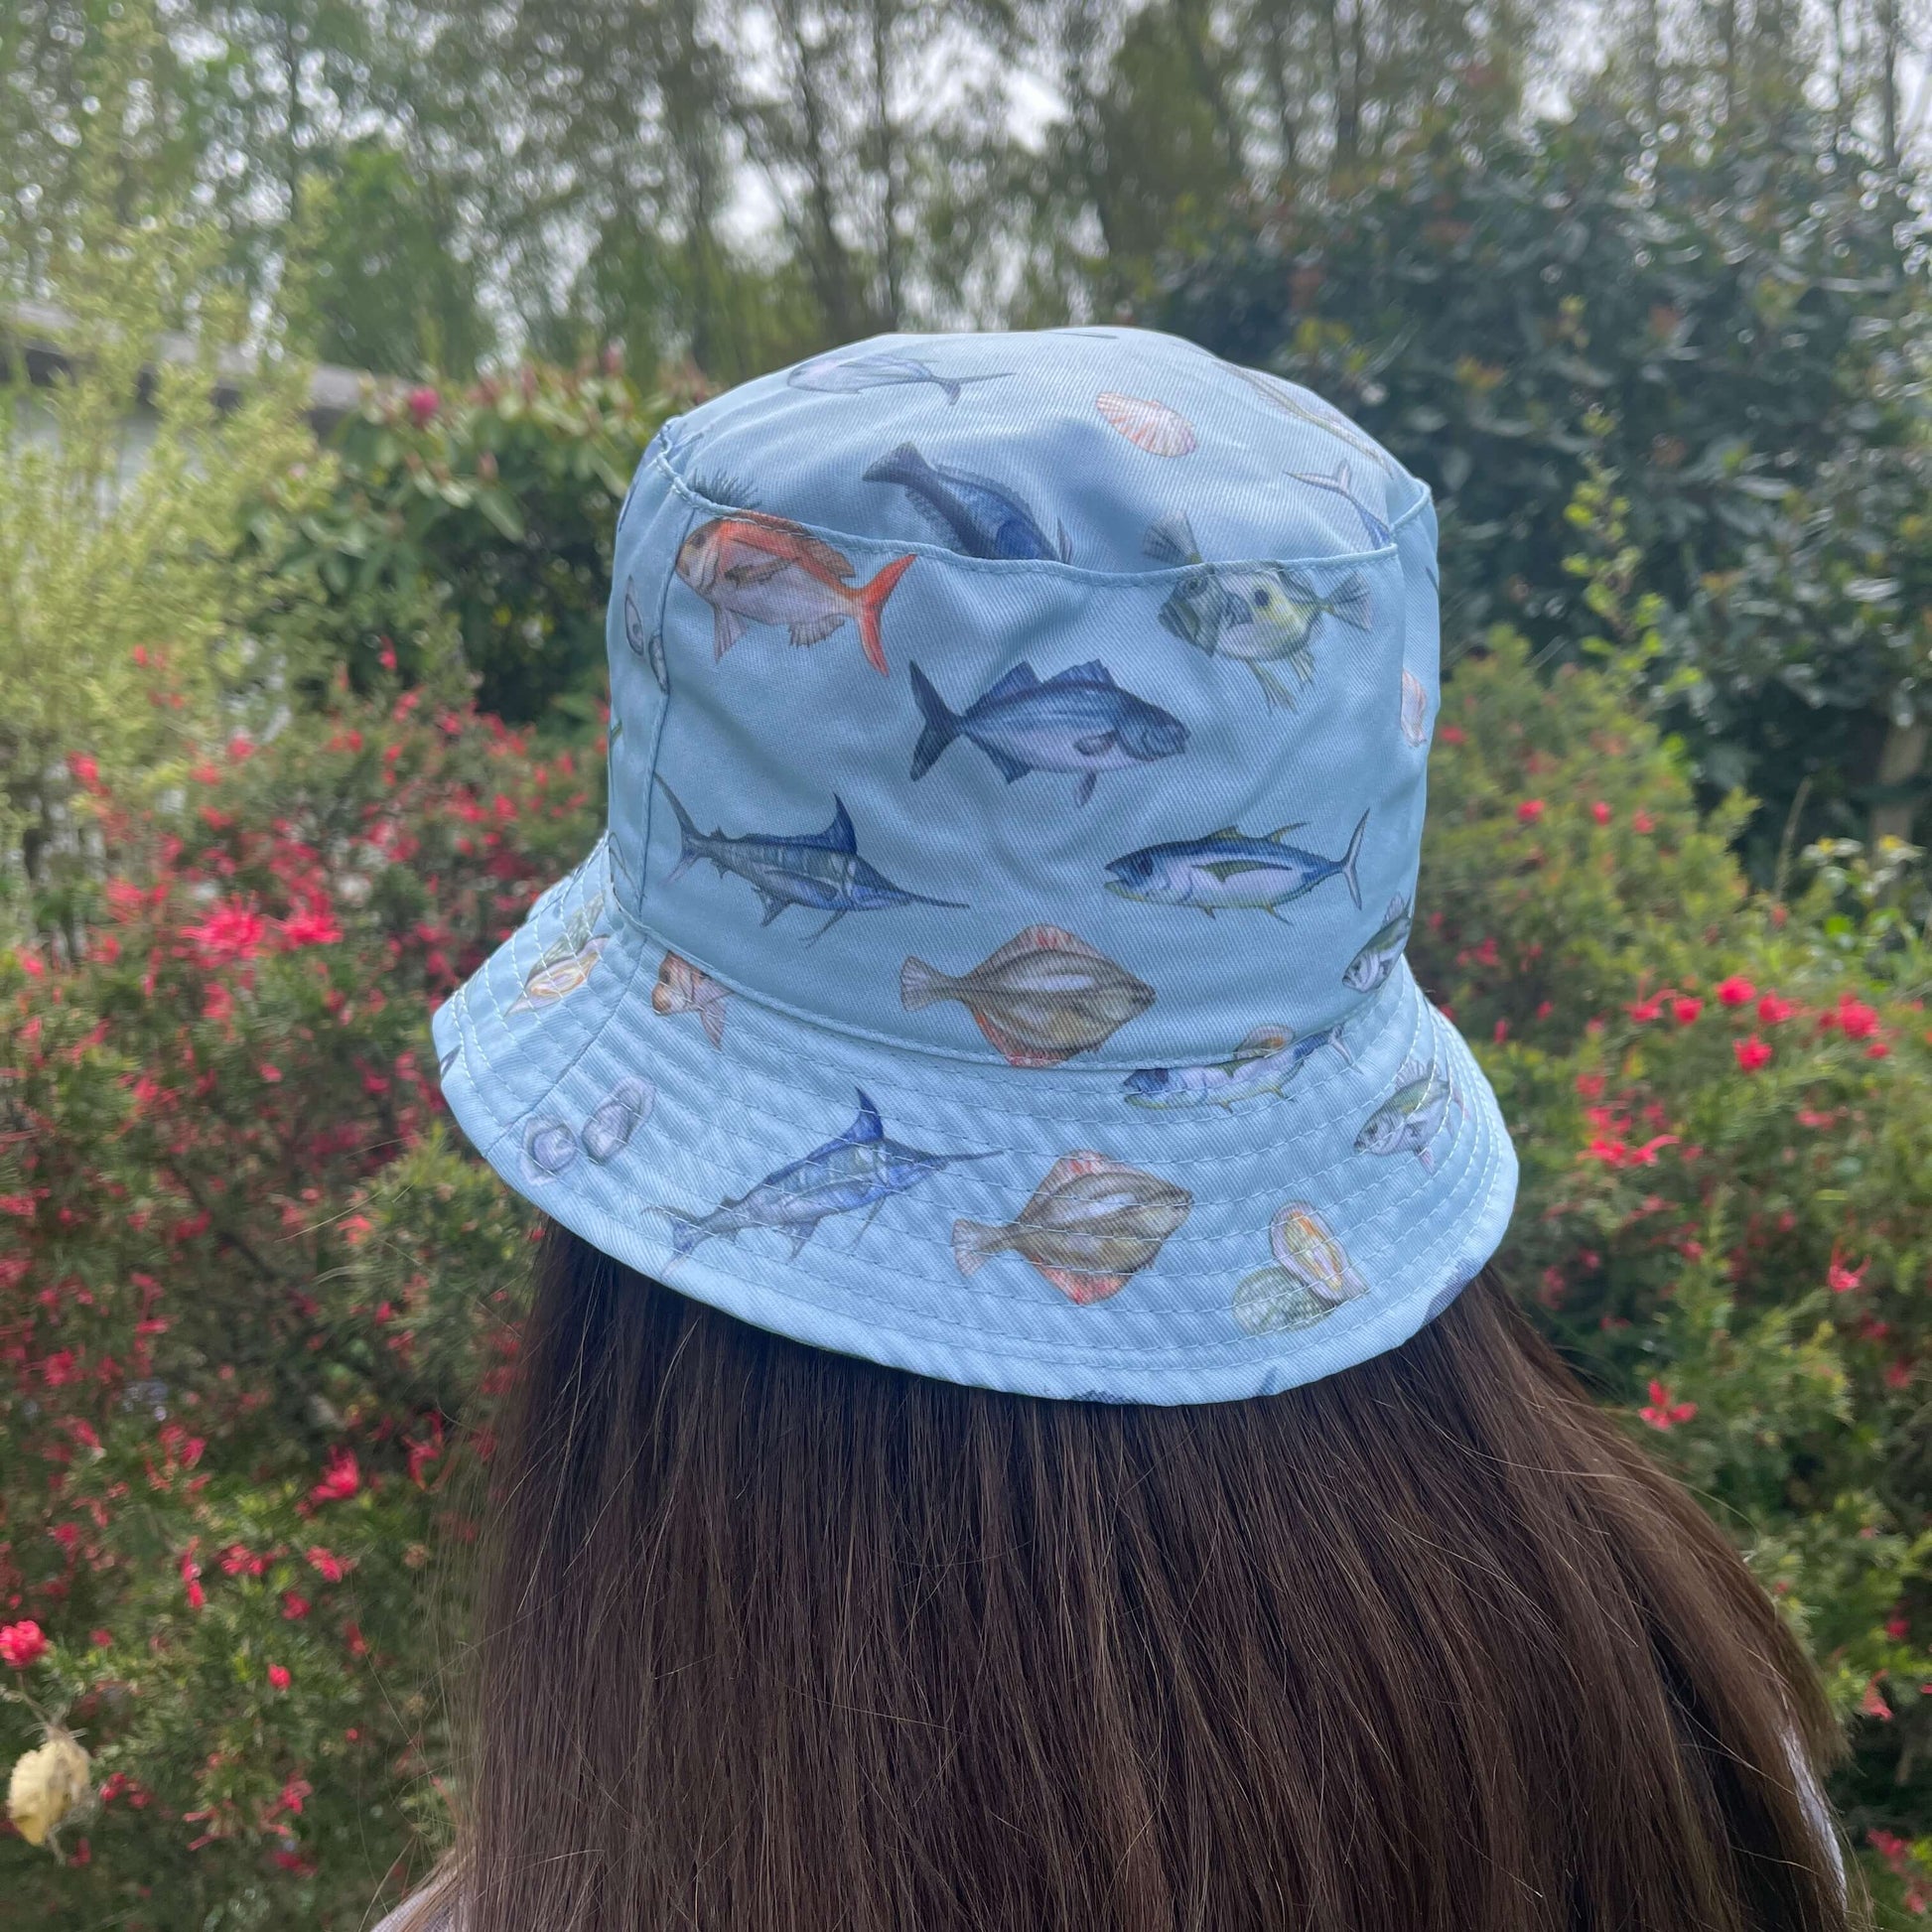 Bucket hat with NZ fish printed on it.